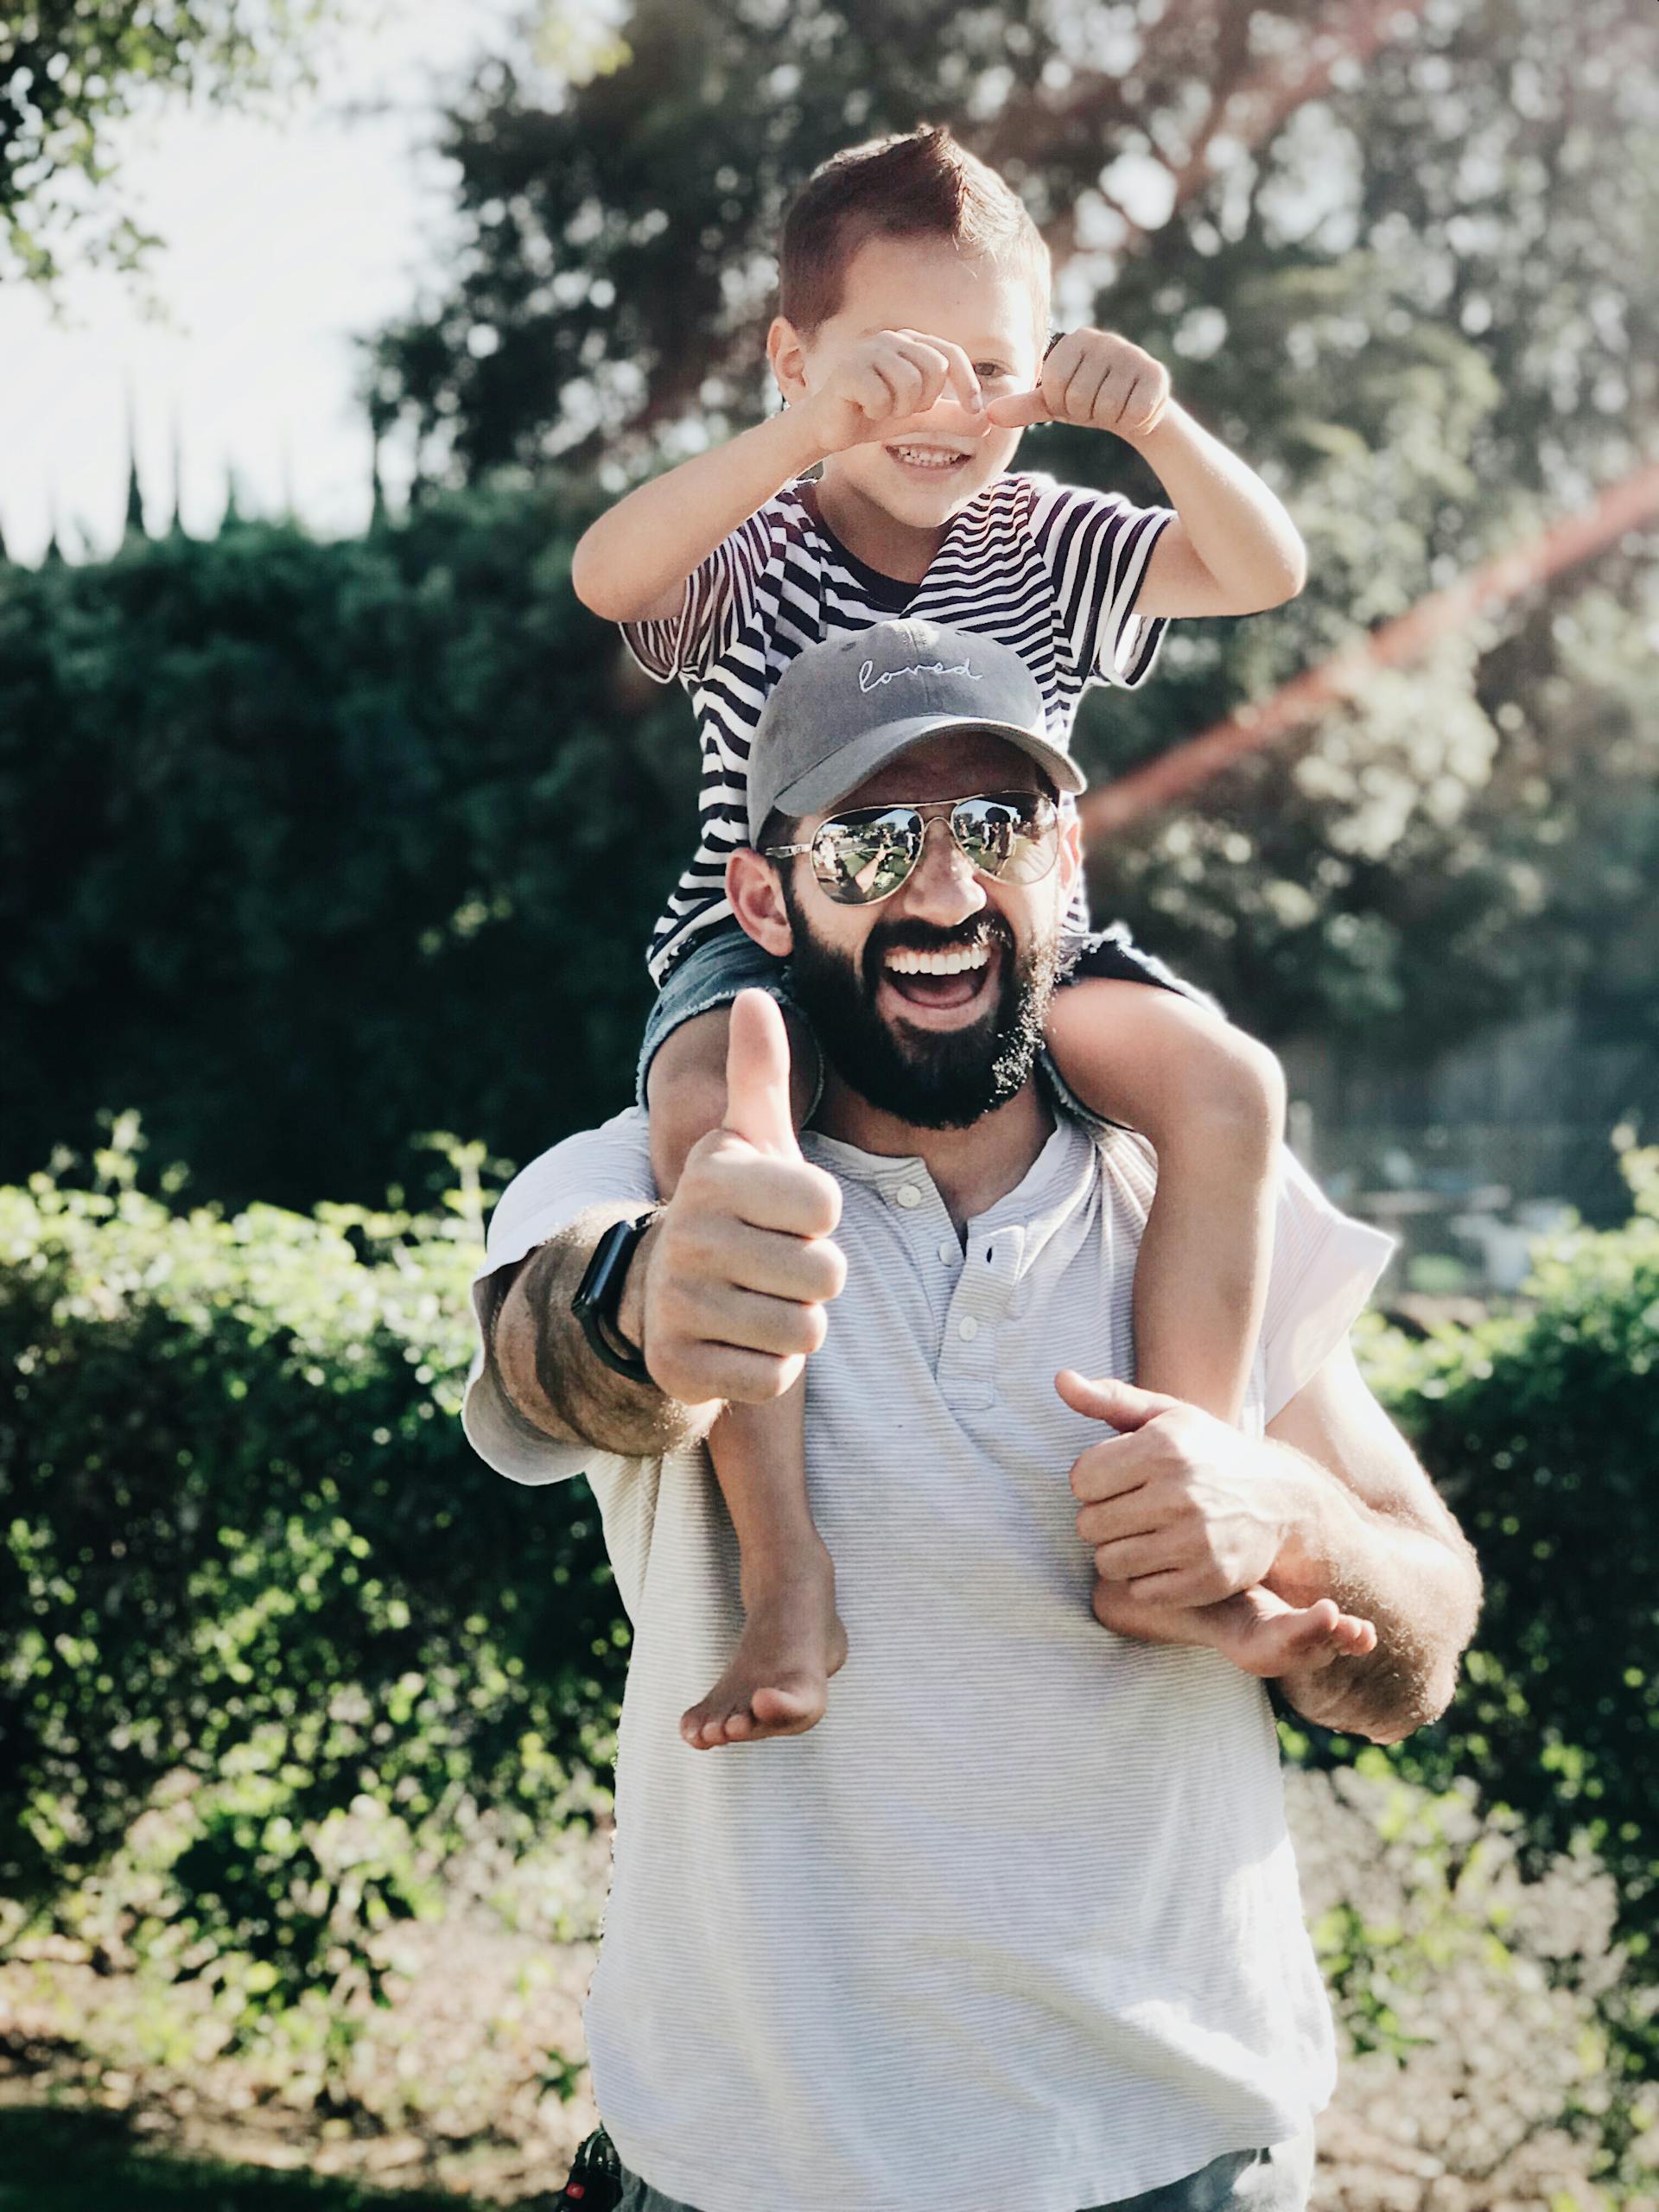 A father carrying his son | Source: Pexels